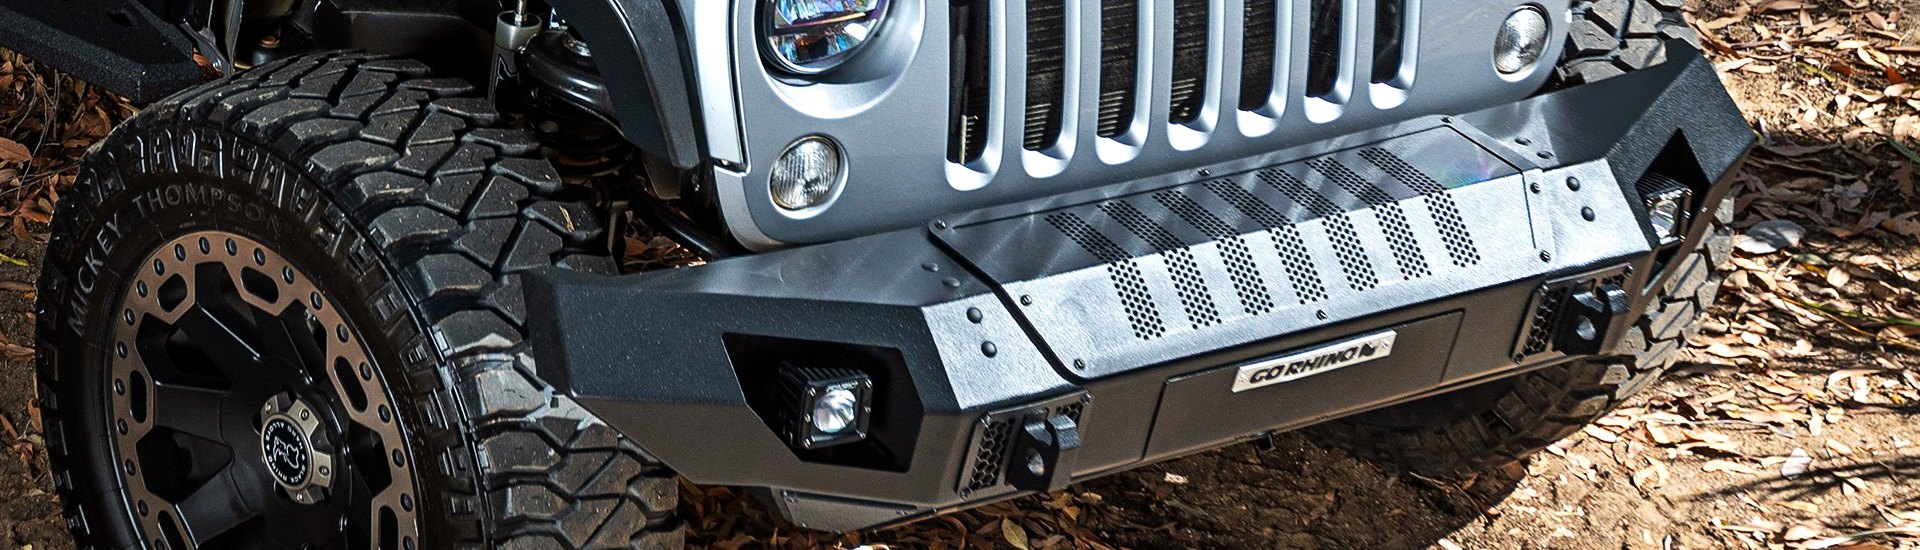 Maximize The Load Capacity Of Your JK With All-New Go Rhino Overland Roof Cage